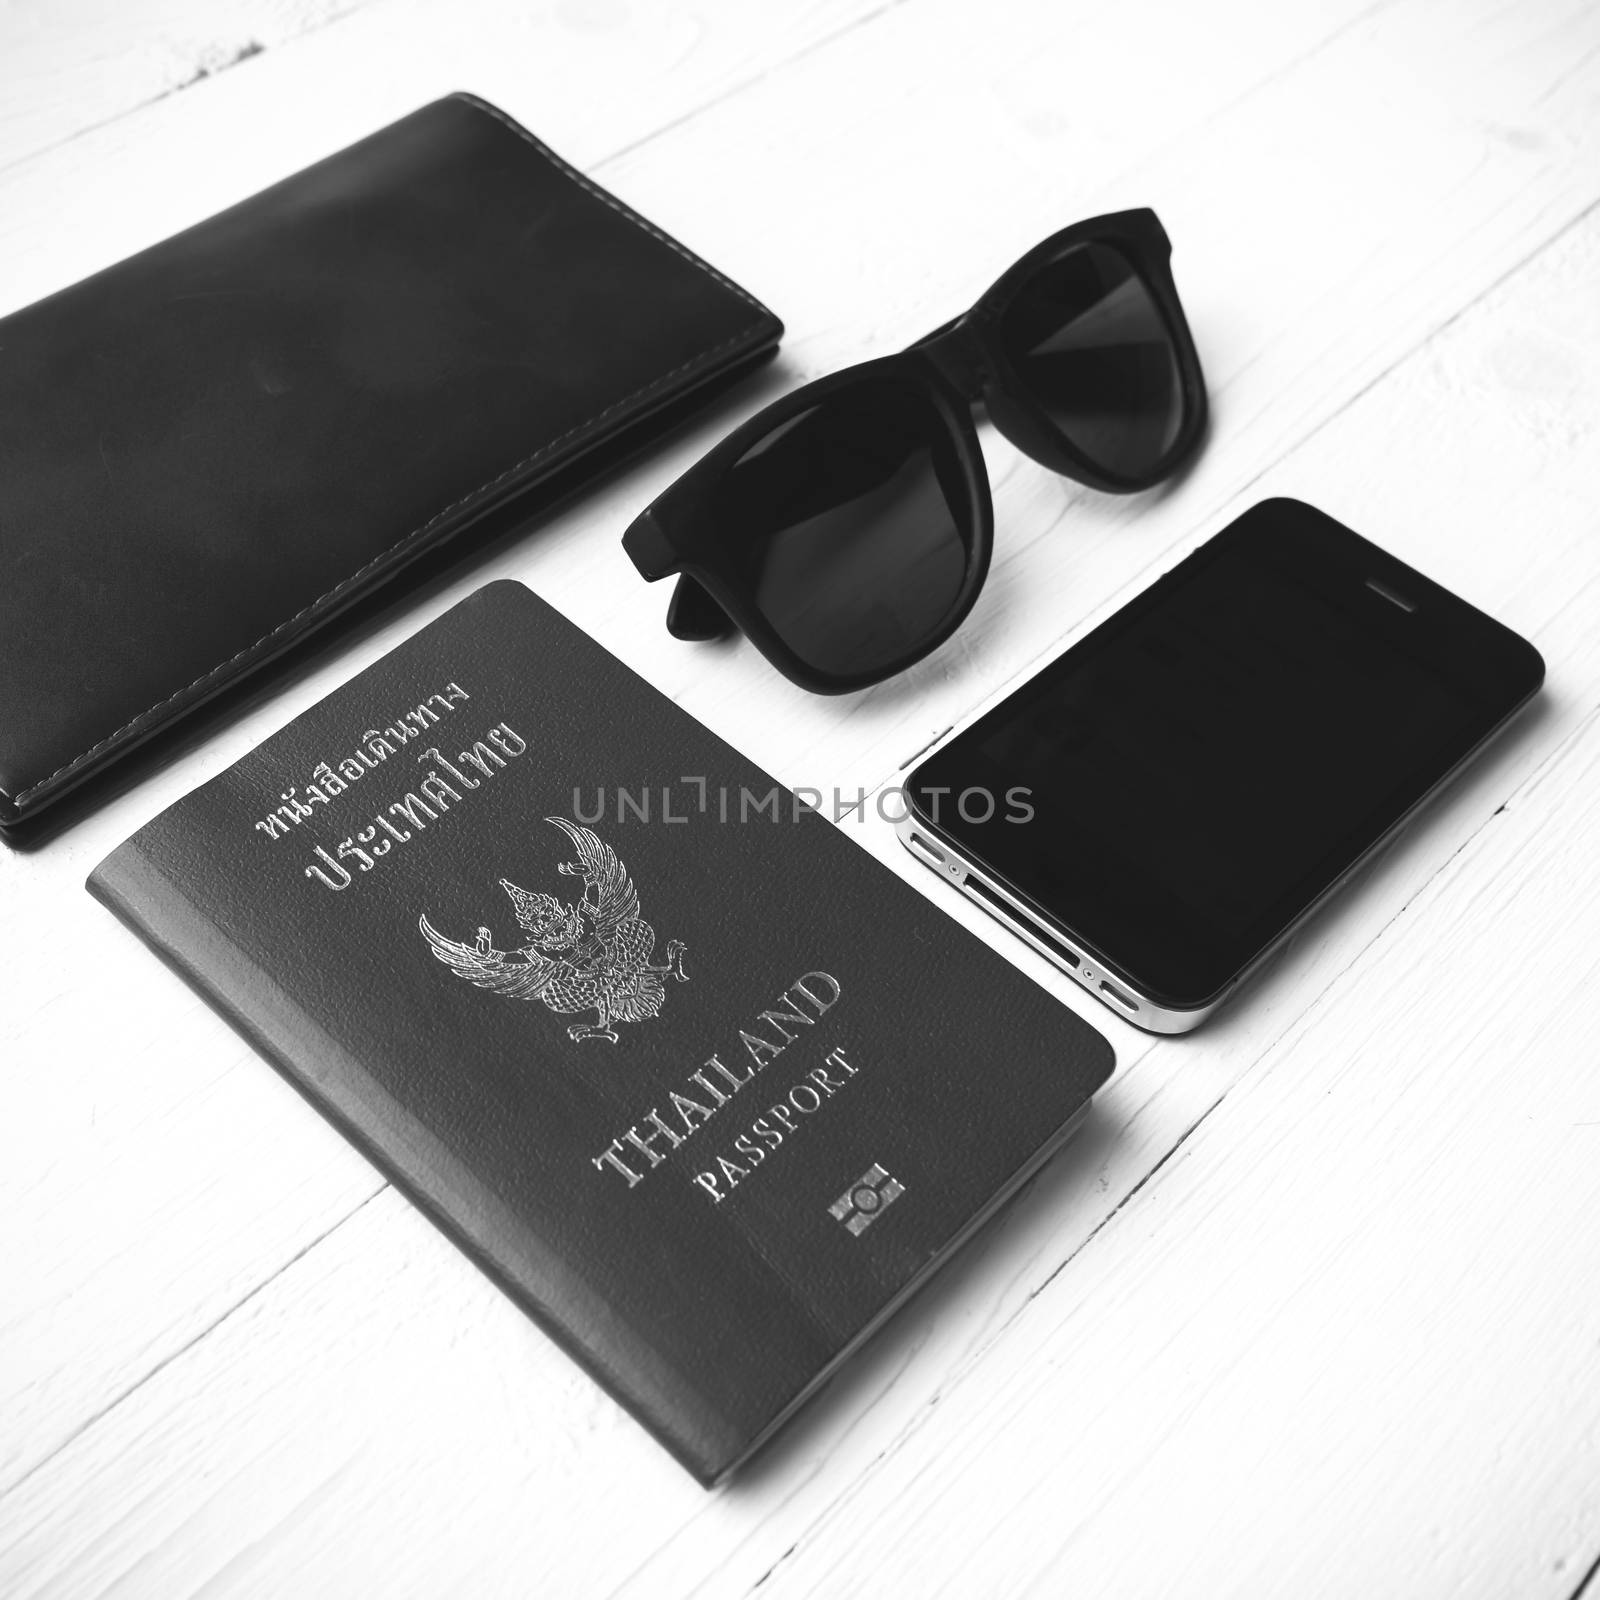 travel gadget over white table black and white color